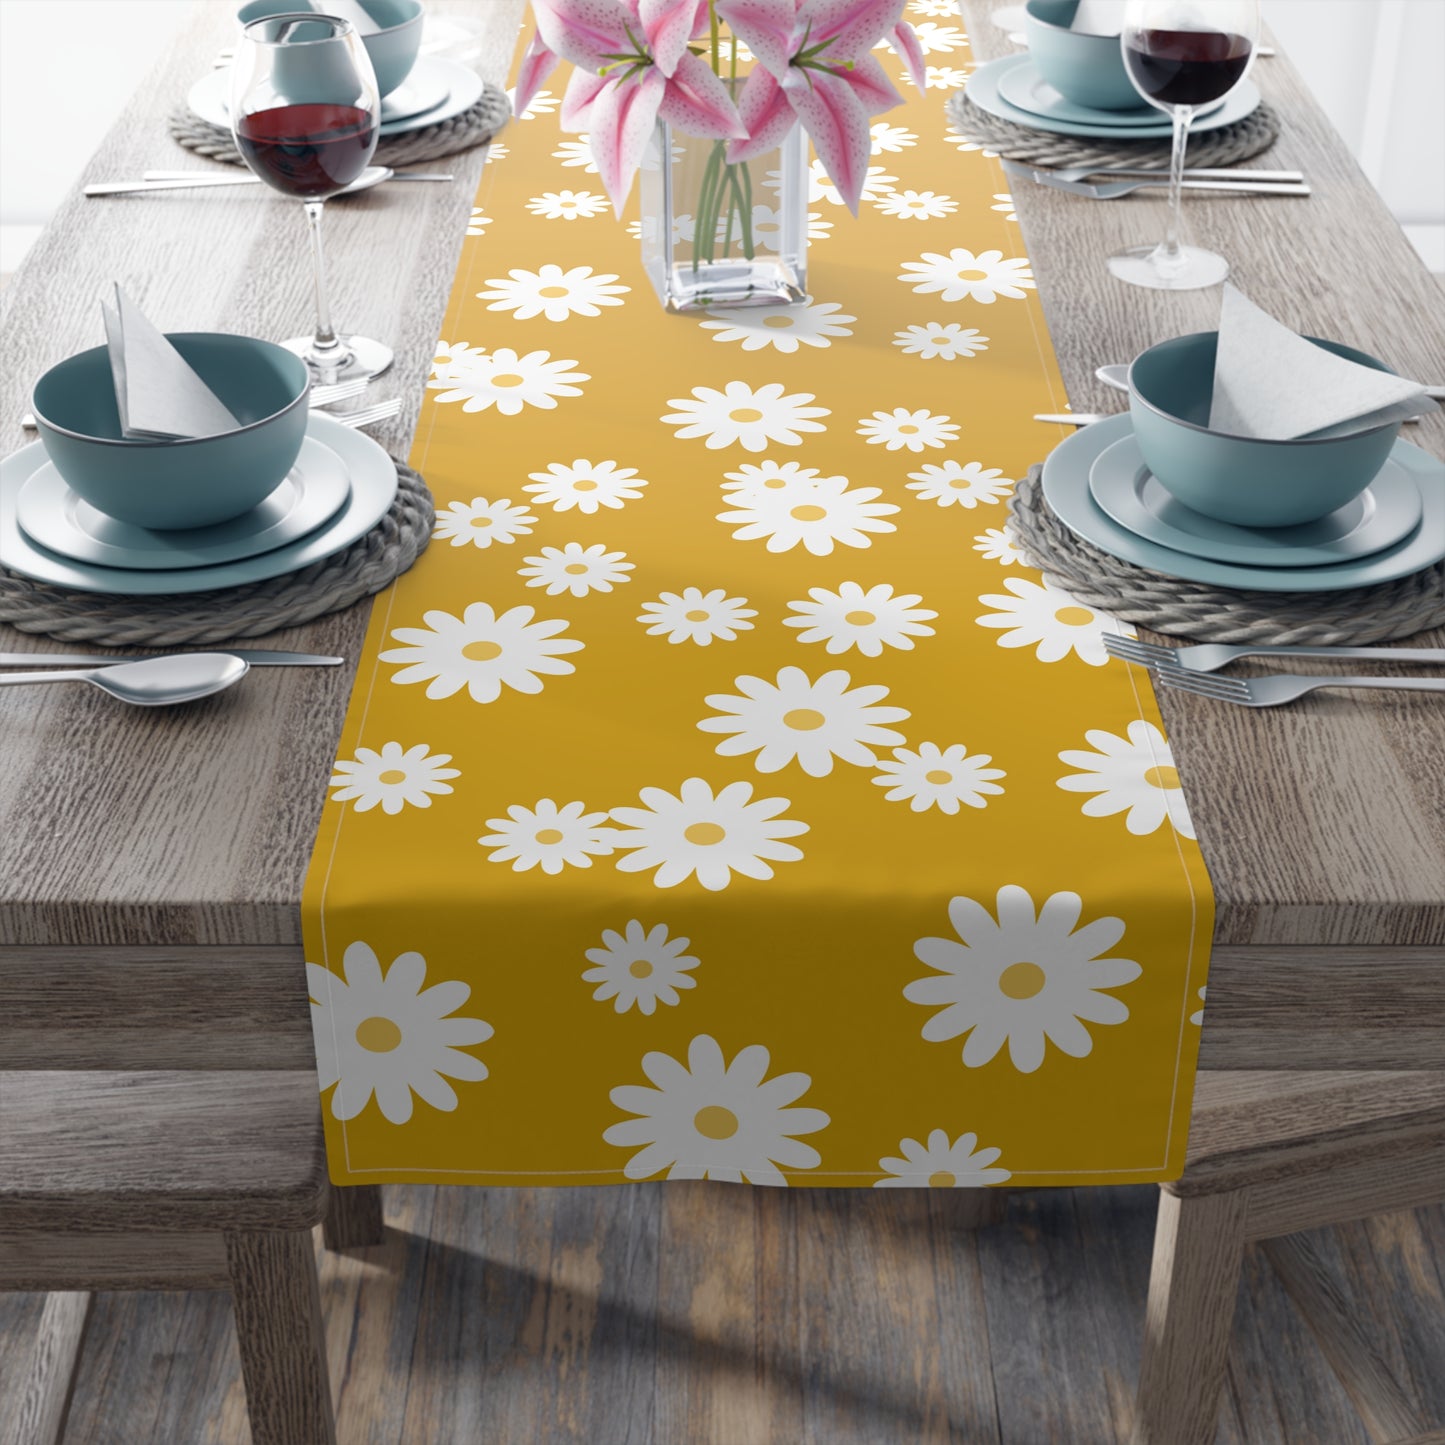 mustard yellow table runner with white daisy print